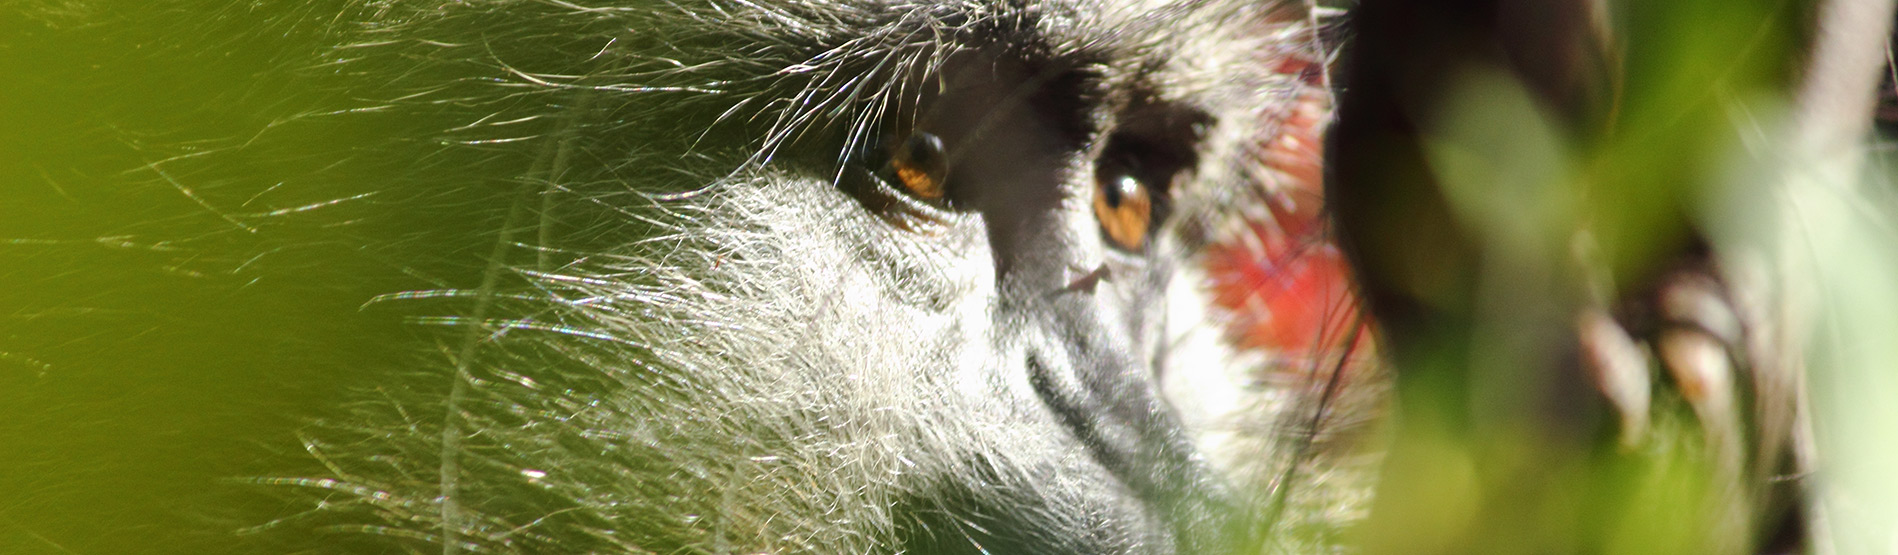 Close-up of a baboon's face